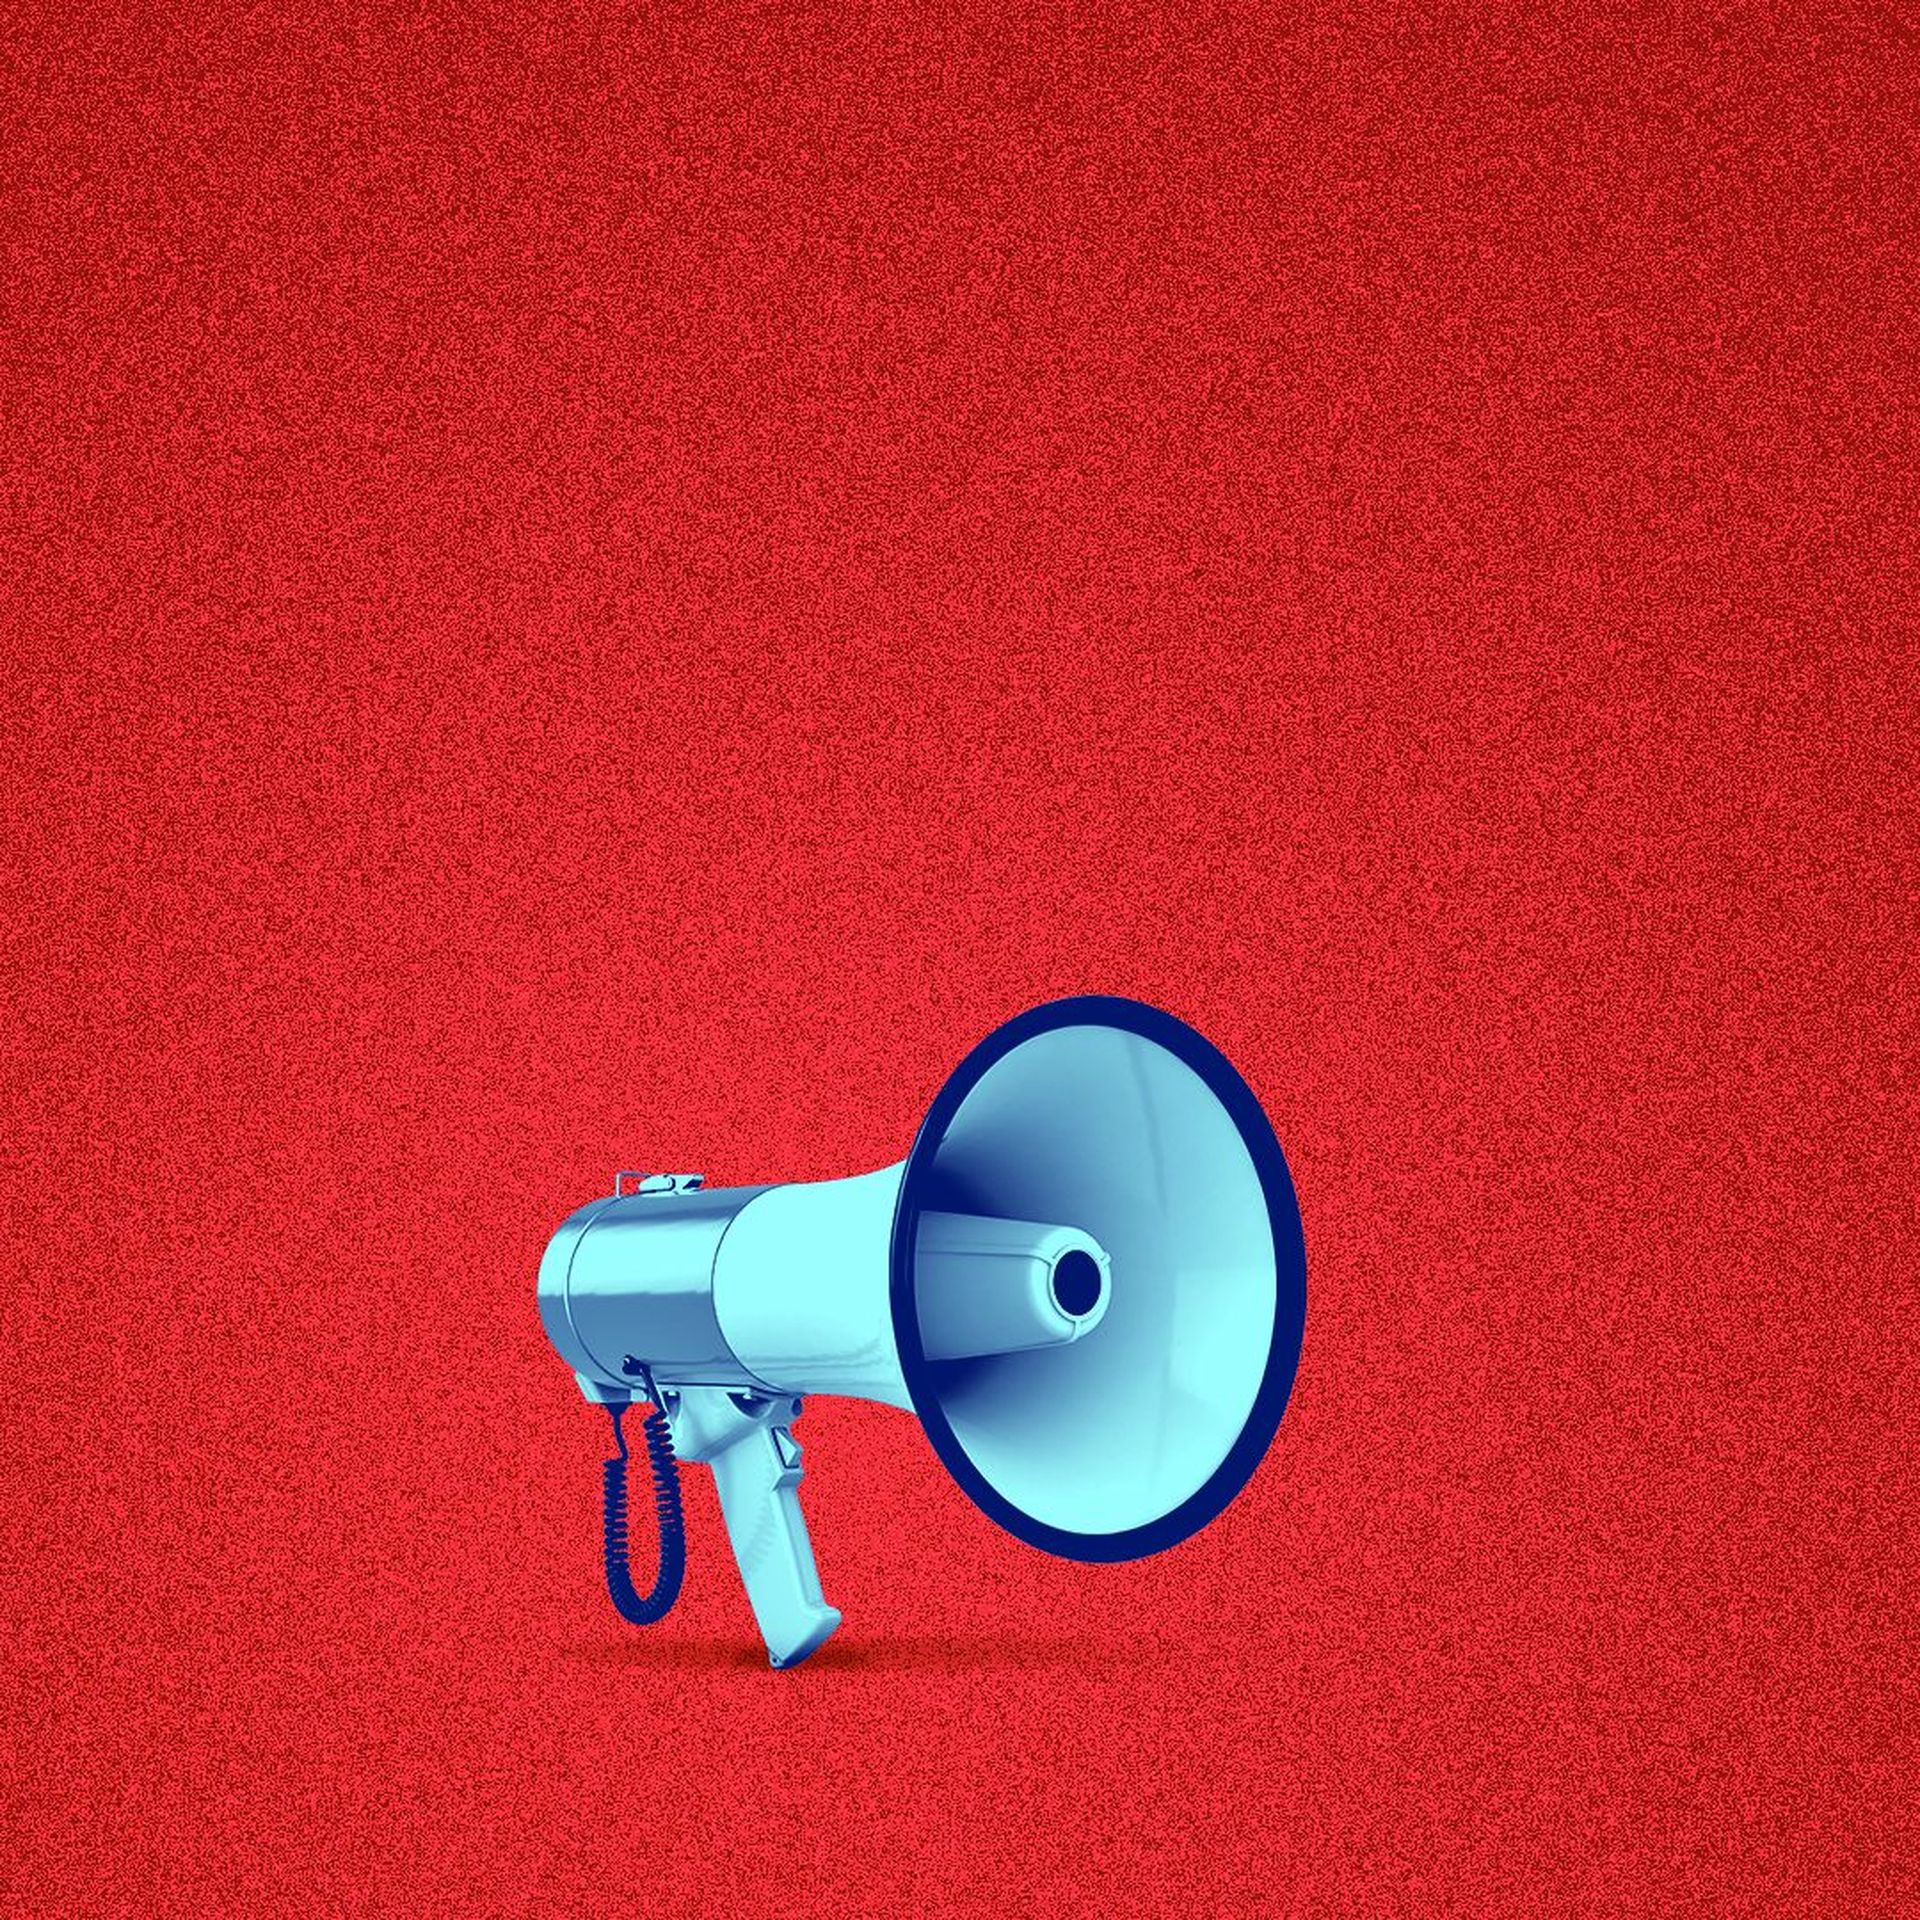 Illustration of a small blue megaphone against a red background.